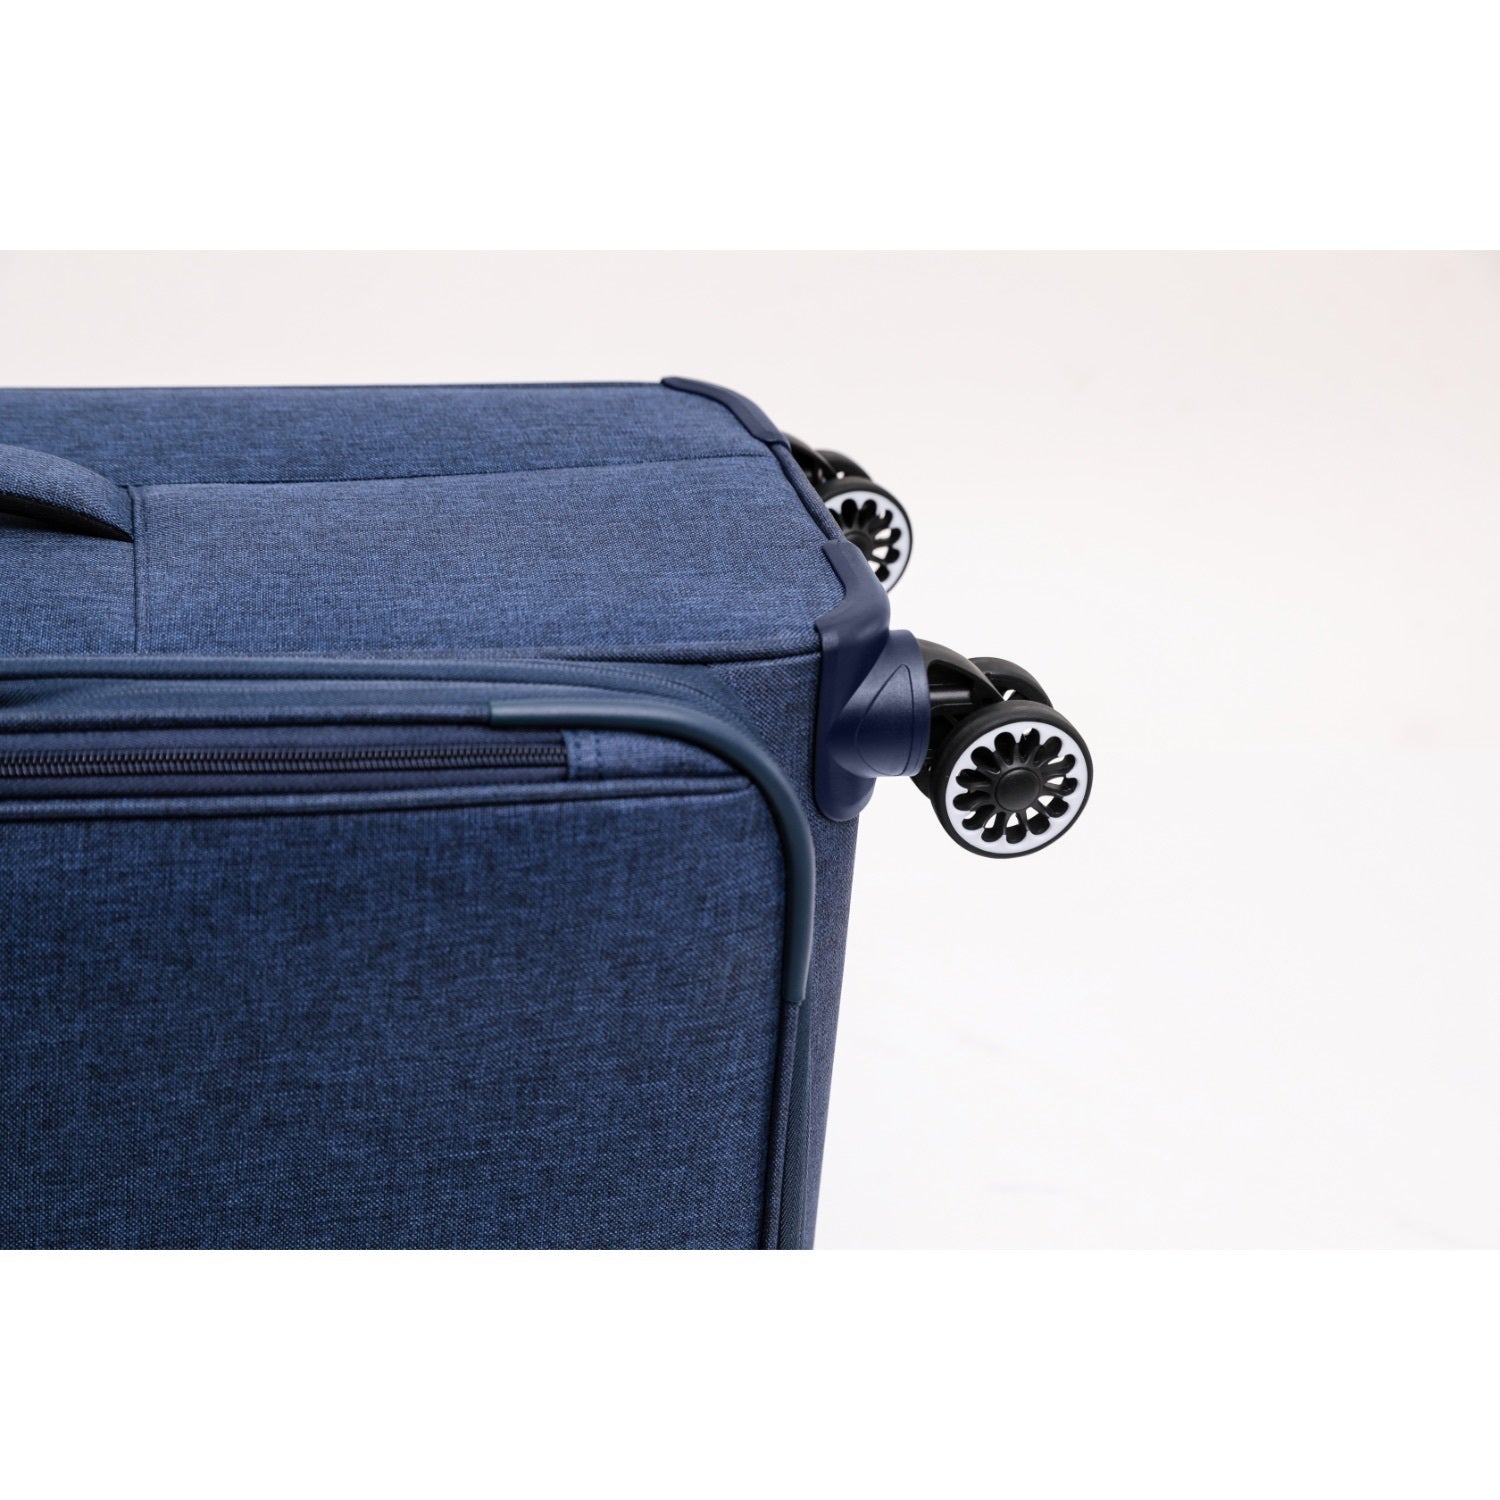 Qantas - QF400 81cm Large Adelaide Soft sided spinner - Navy-11